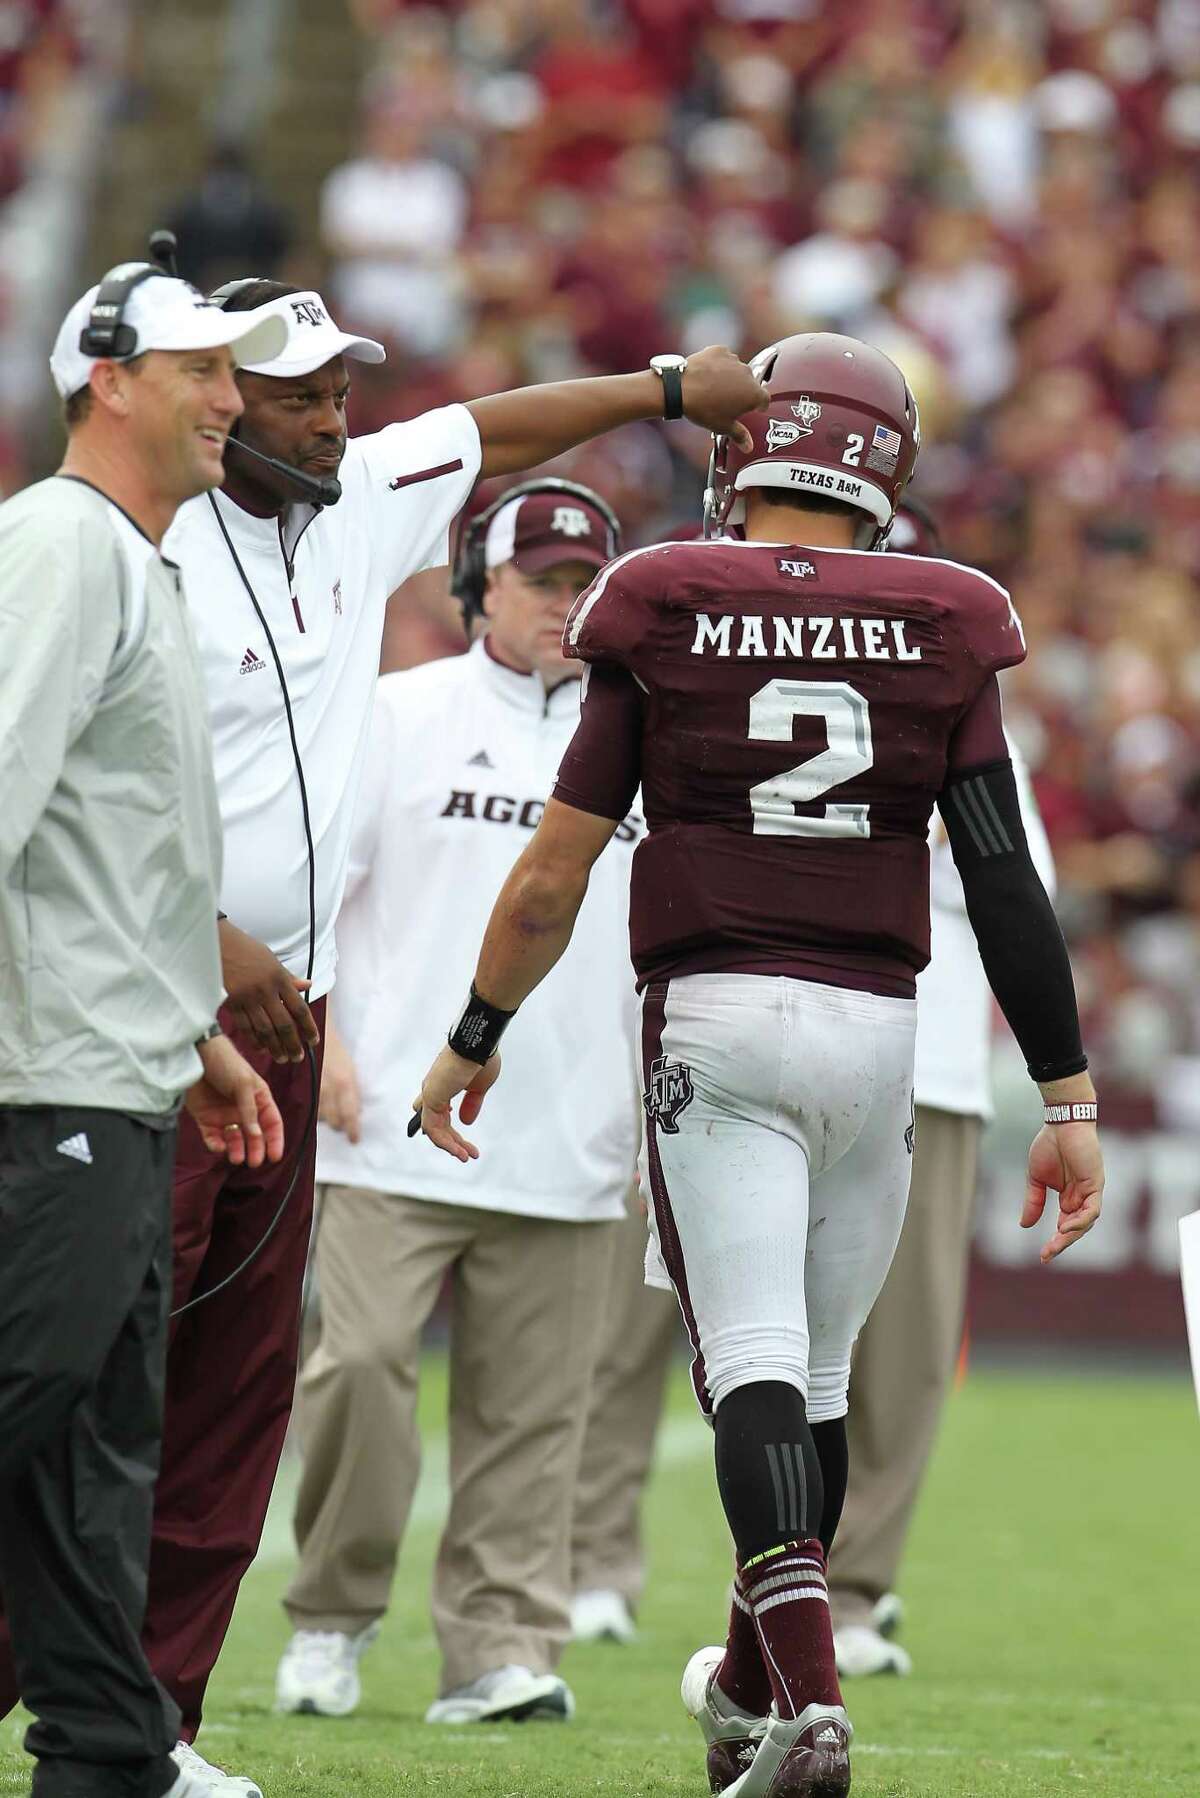 Texas A&M quarterback Johnny Manziel (2) celebrates his touchdown Texas A&M head coach Kevin Sumlin in the fourth quarter of a college football game at Kyle Field, Saturday, Sept. 29, 2012, in College Station. Texas A&M beat Arkansas 58-10.